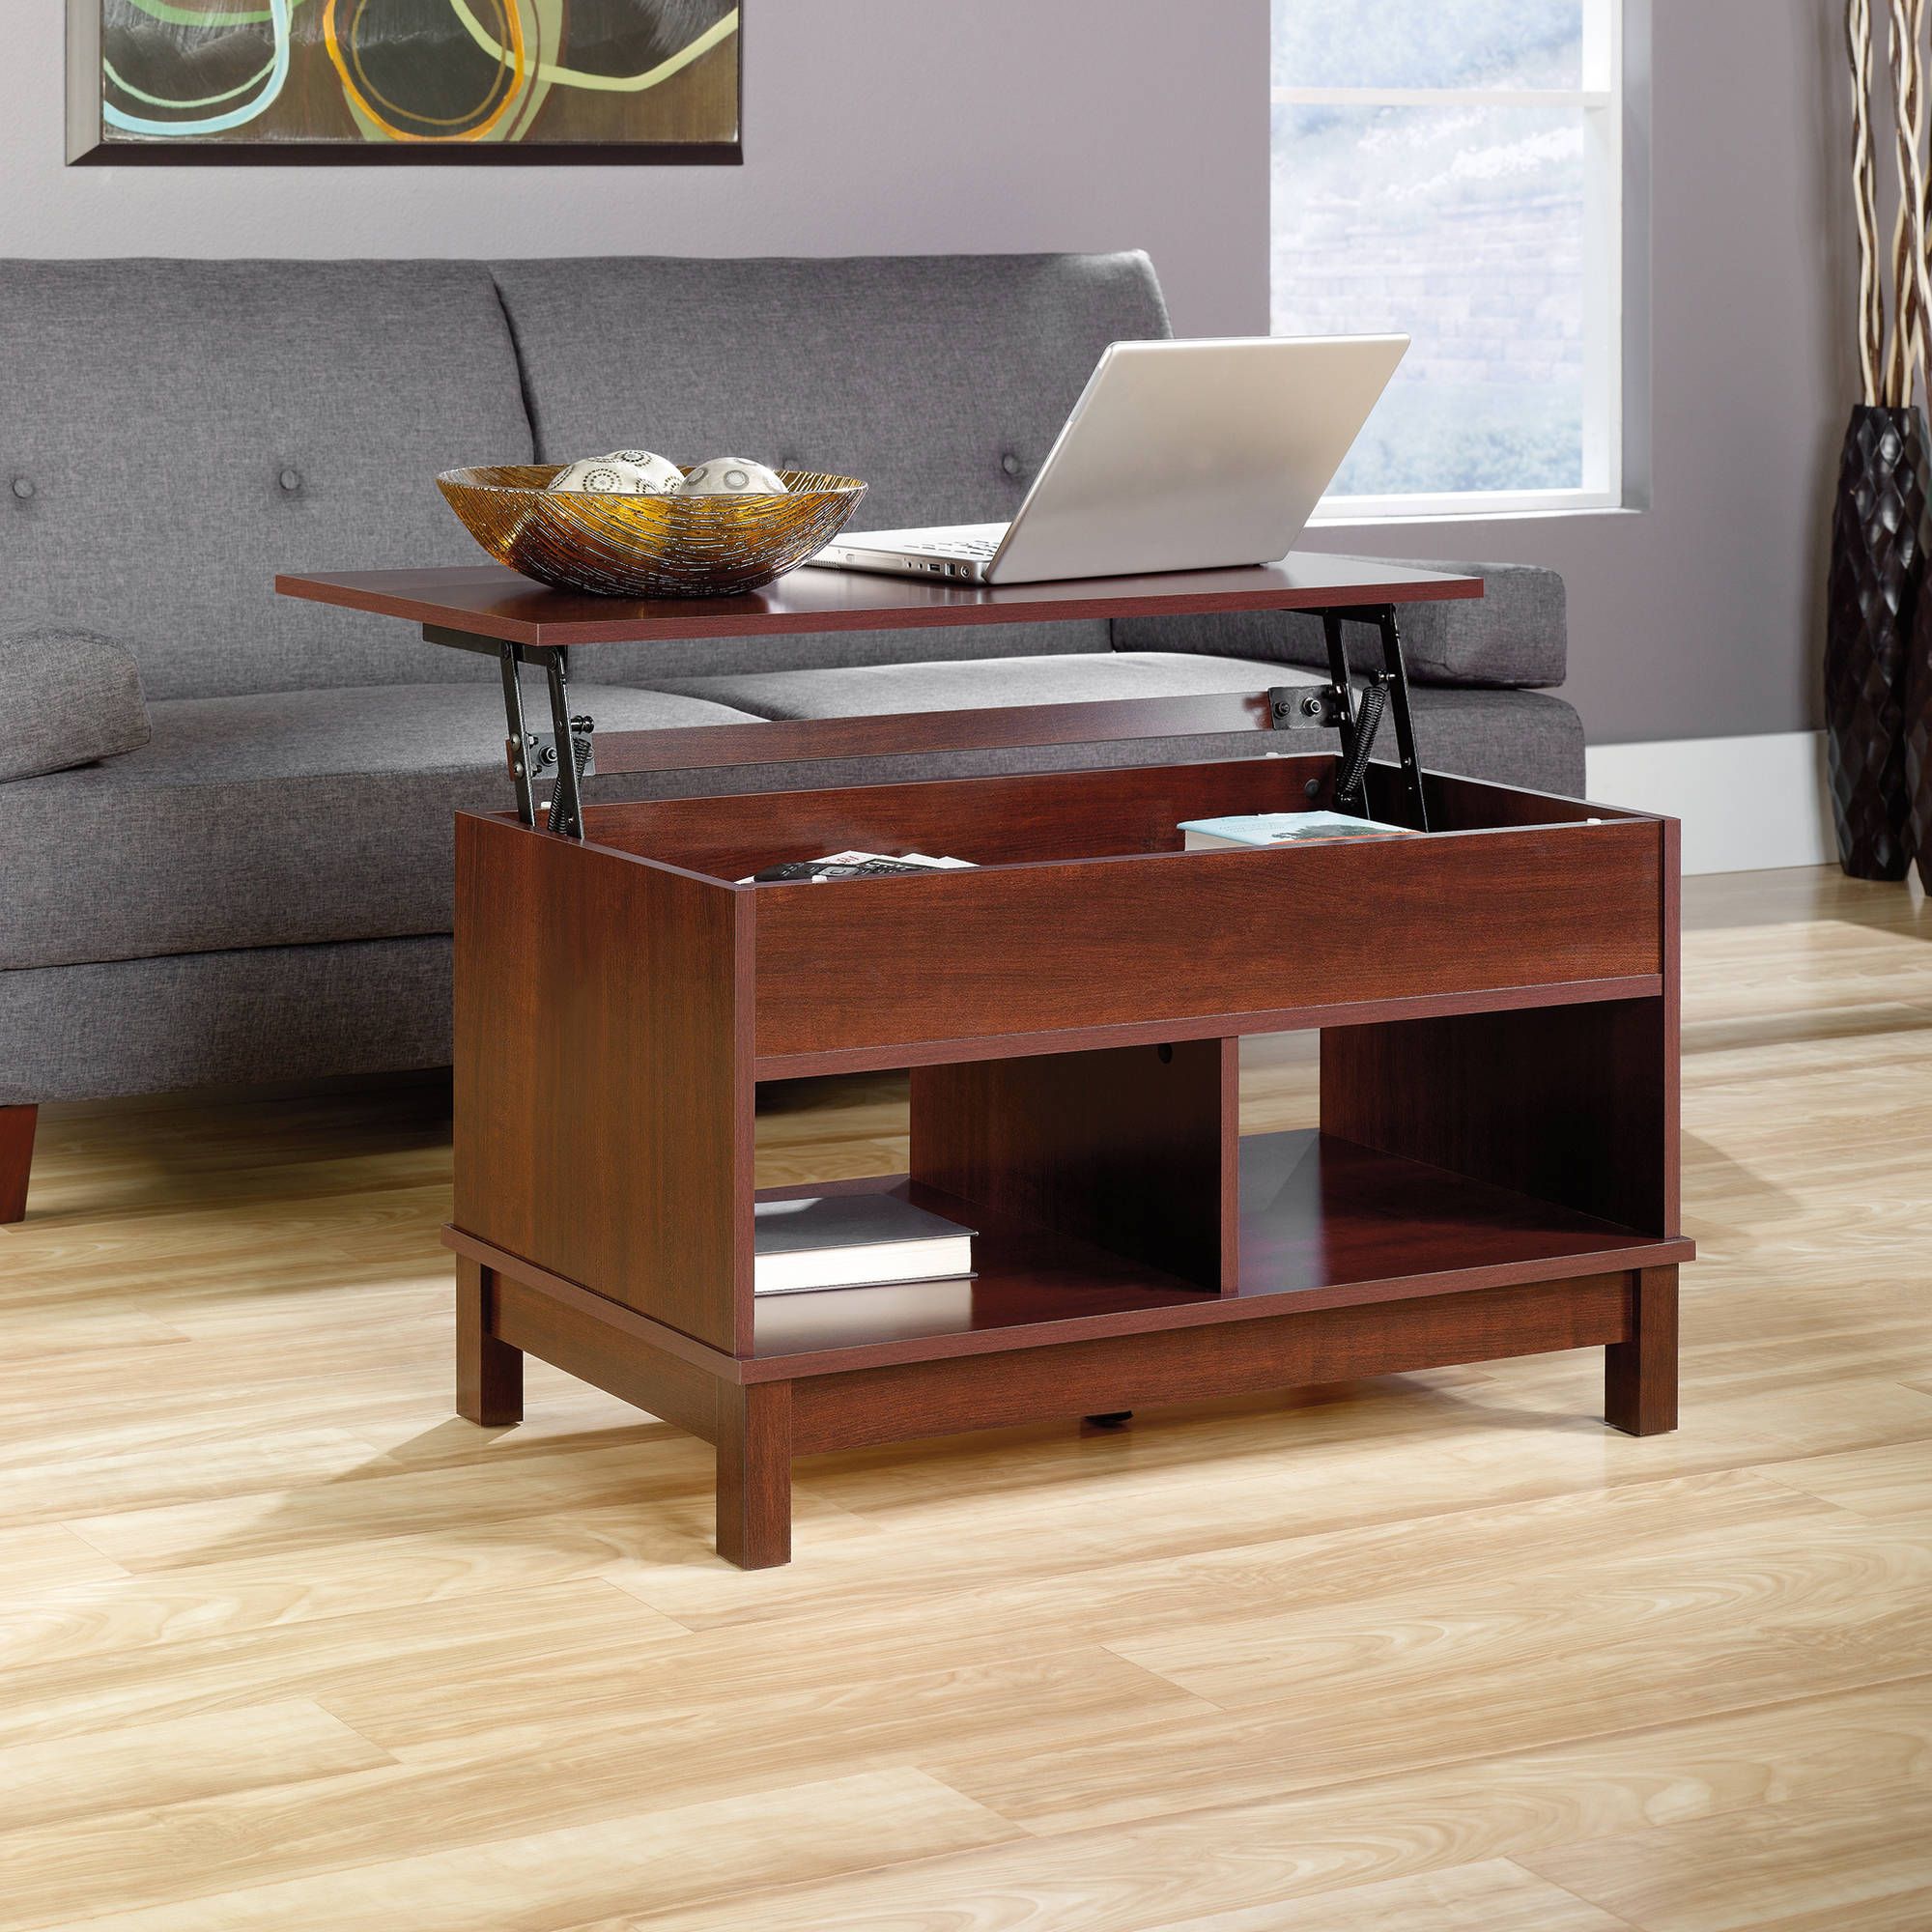 Lift Top Coffee Tables With Storage With Regard To Lift Top Coffee Tables With Storage Drawers (Gallery 16 of 20)